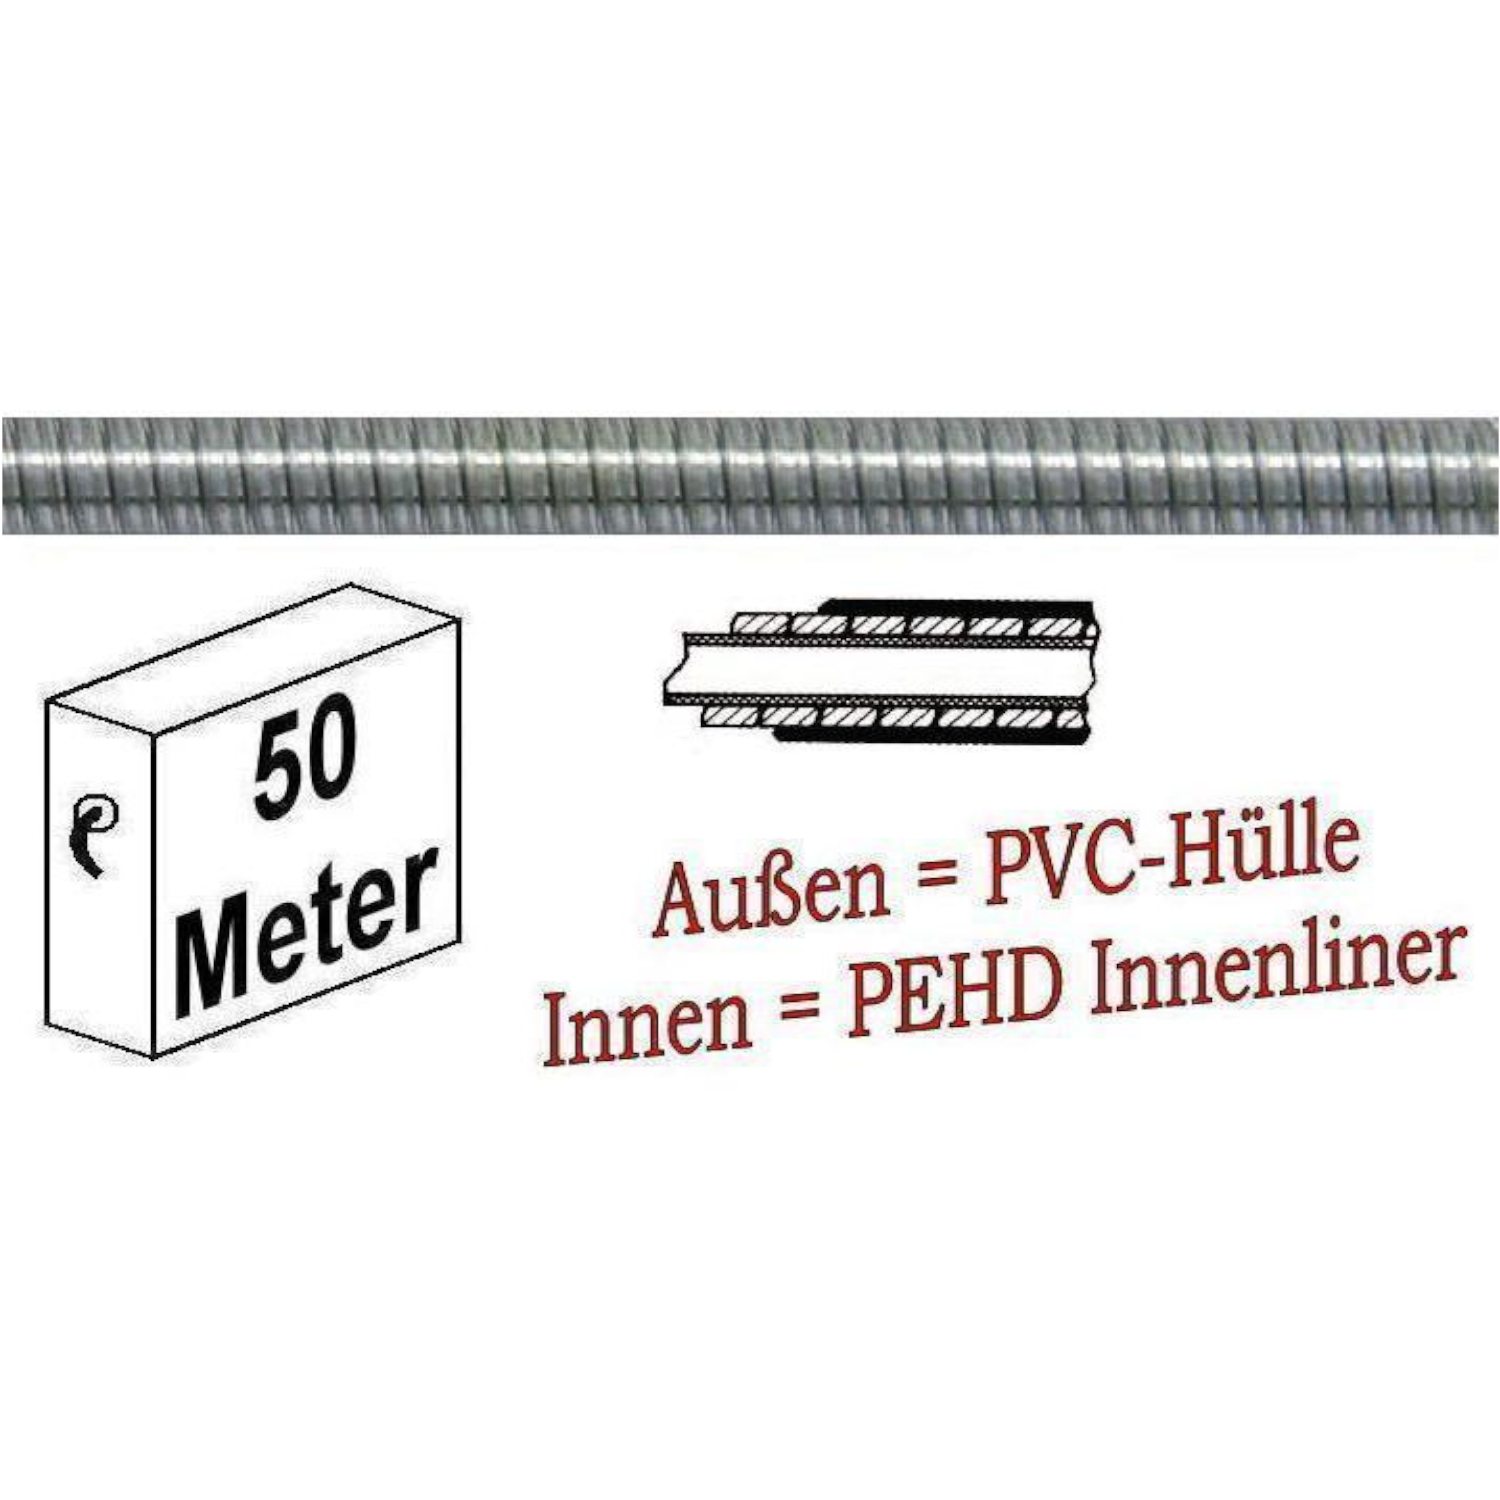 BREMS-Hülle 50 m in Blue Box-DT1135005C, in transparent, mit PE-HD-Innenliner